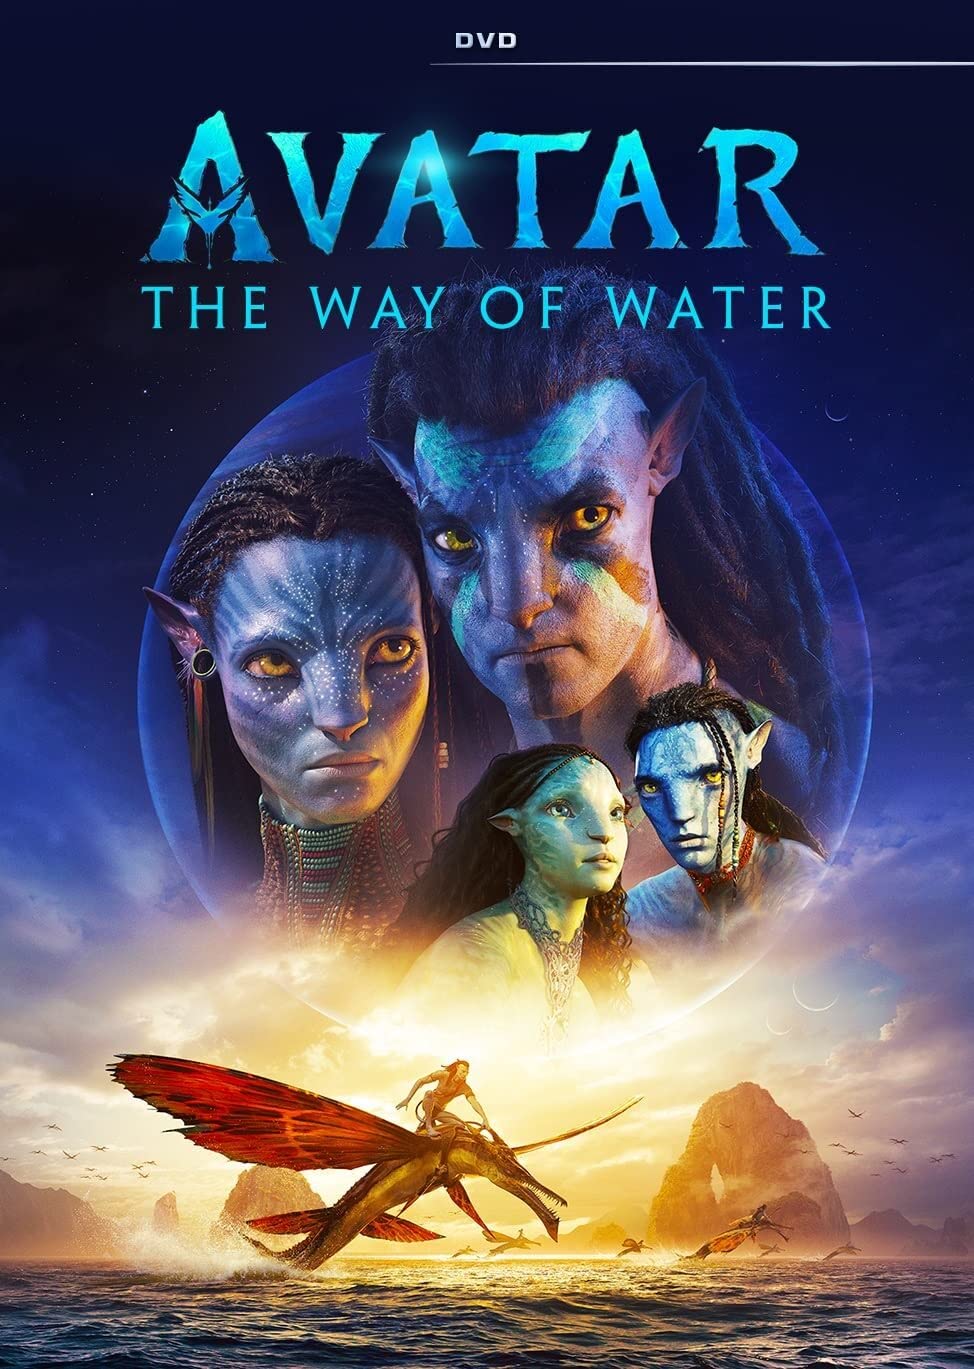 Image for "Avatar: way of water"